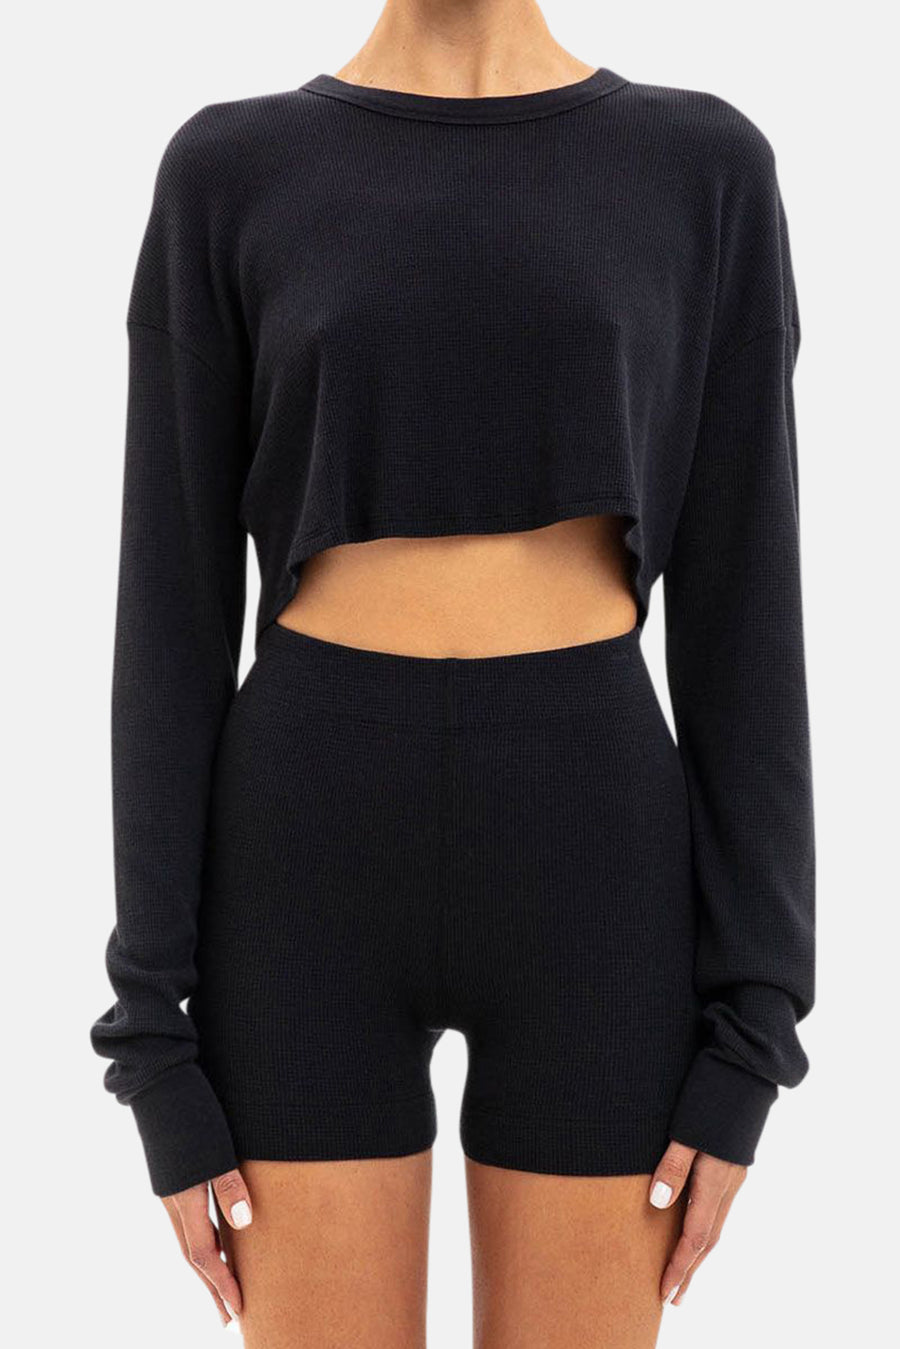 Cropped Oversized Thermal Black